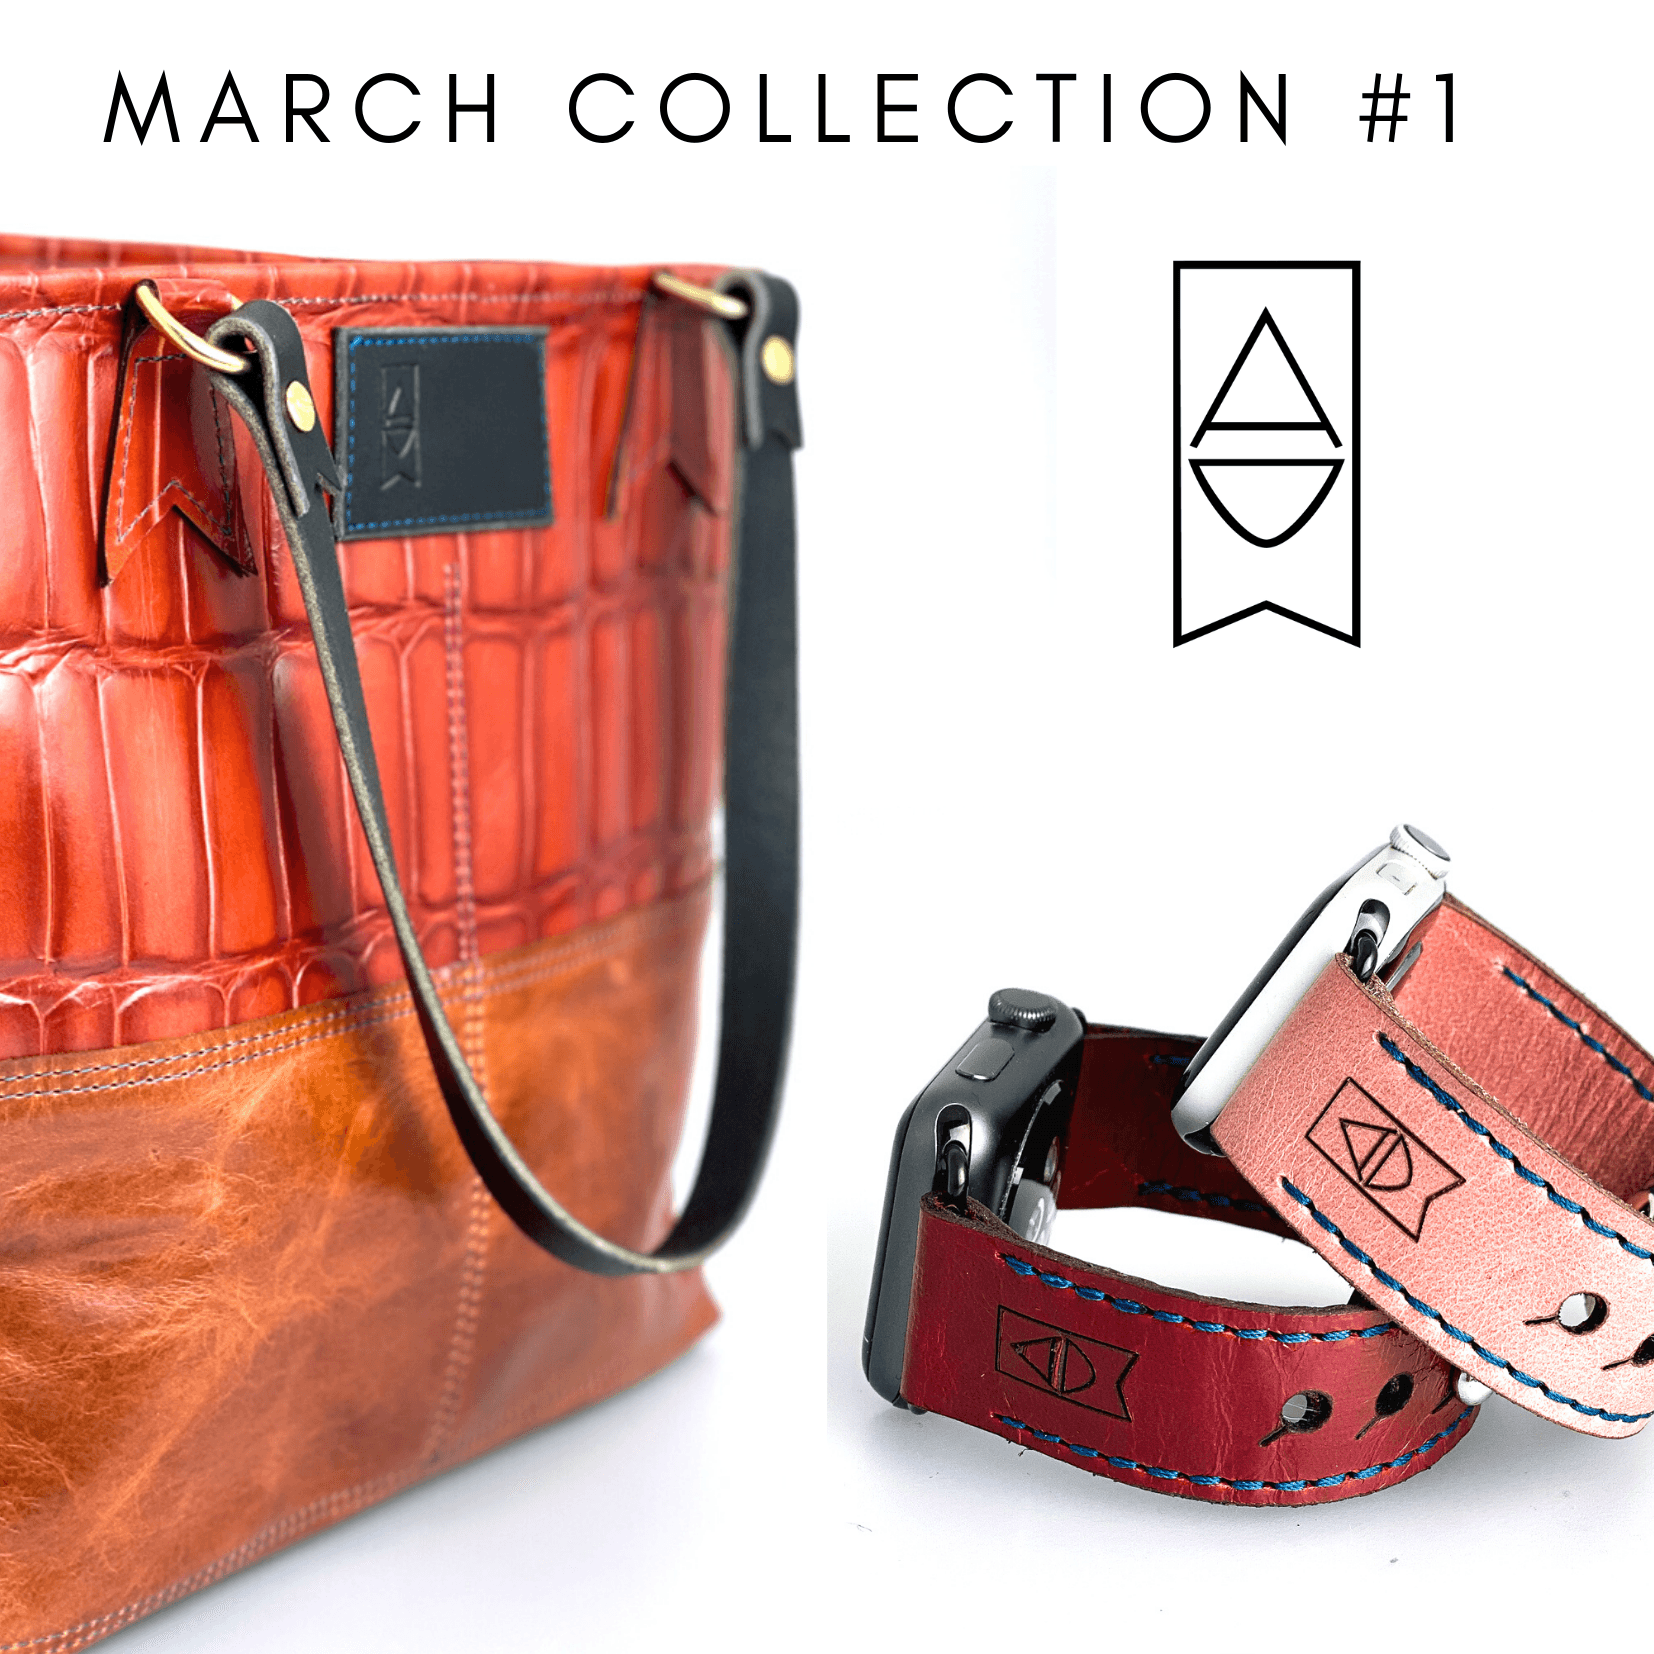 March Collection Release #1 - Alexis Drake